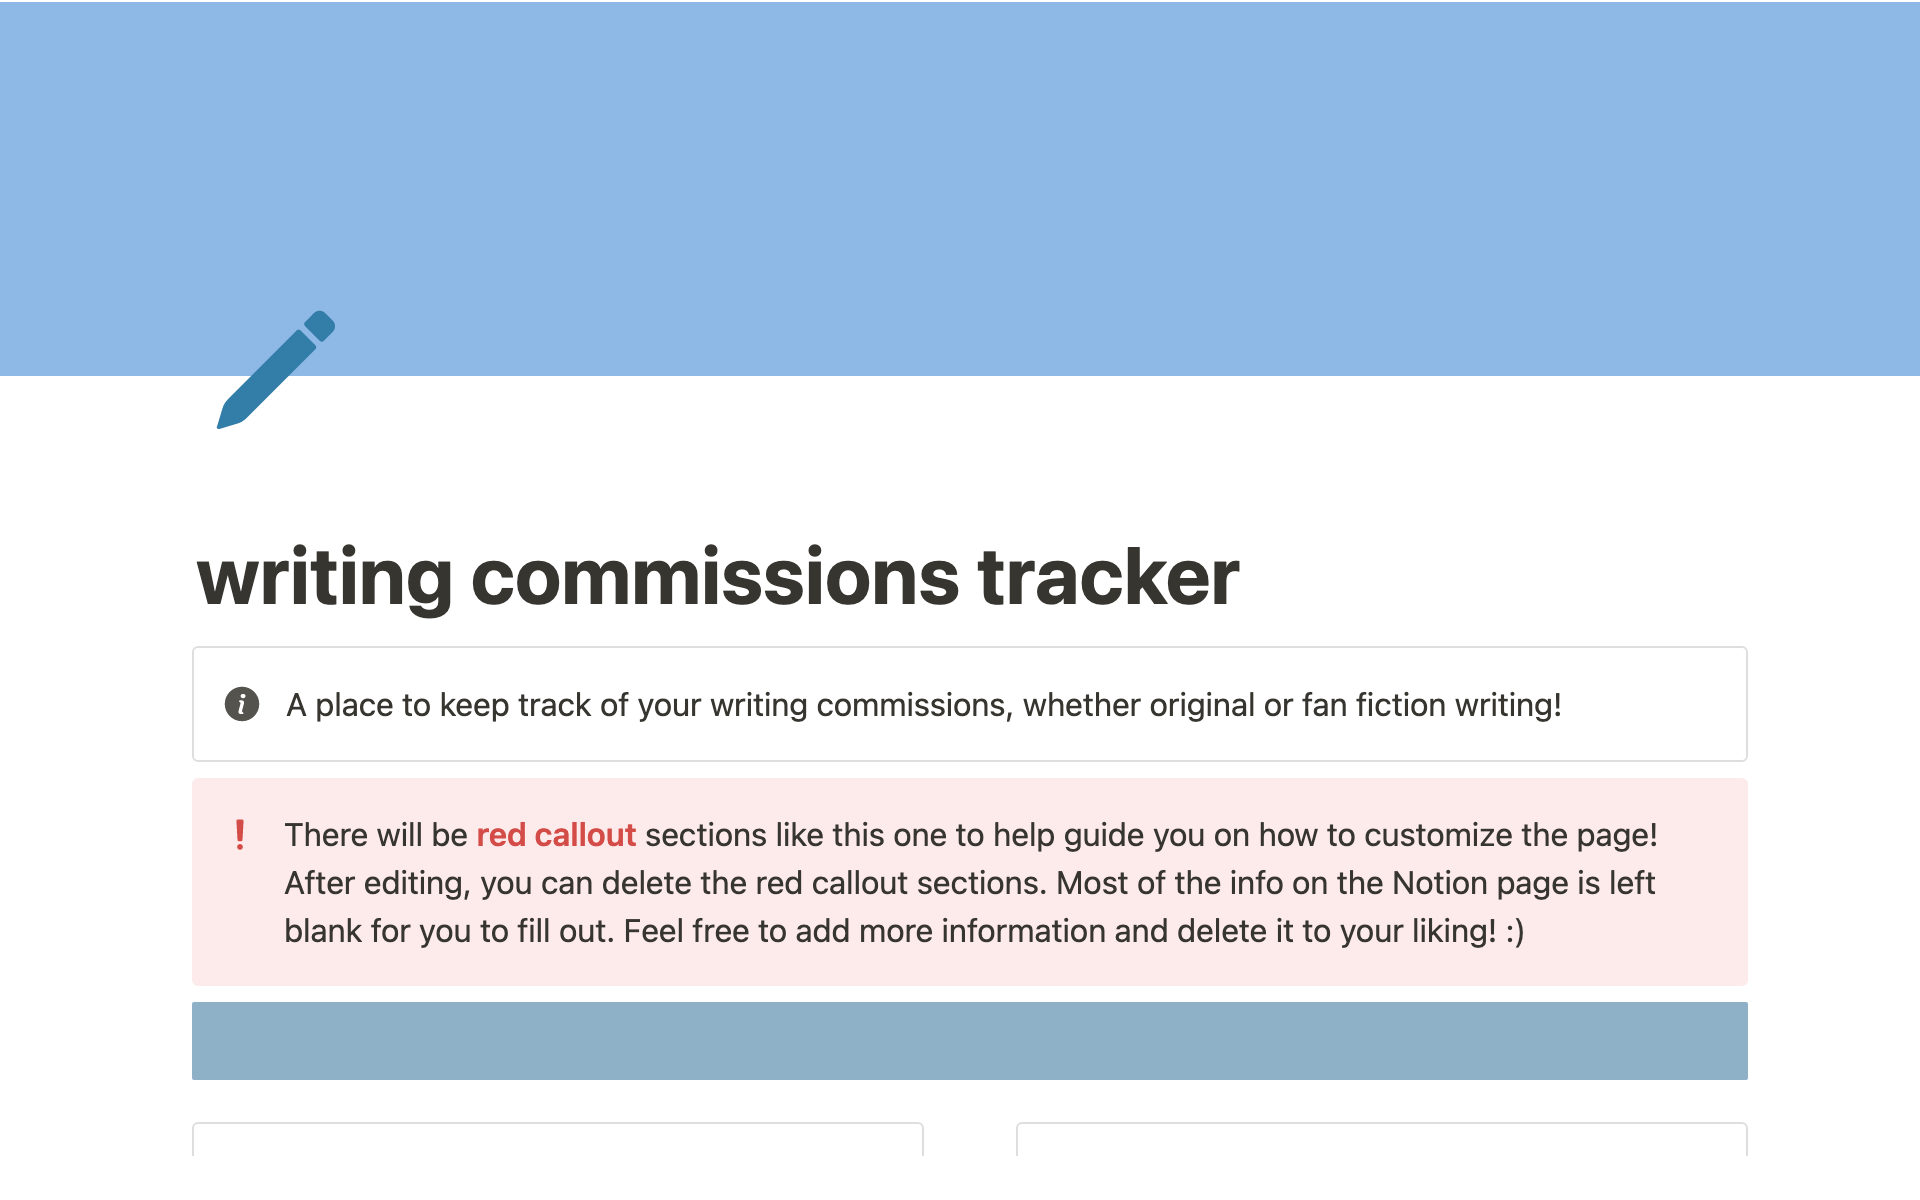 A place to help keep track of your writing commissions.